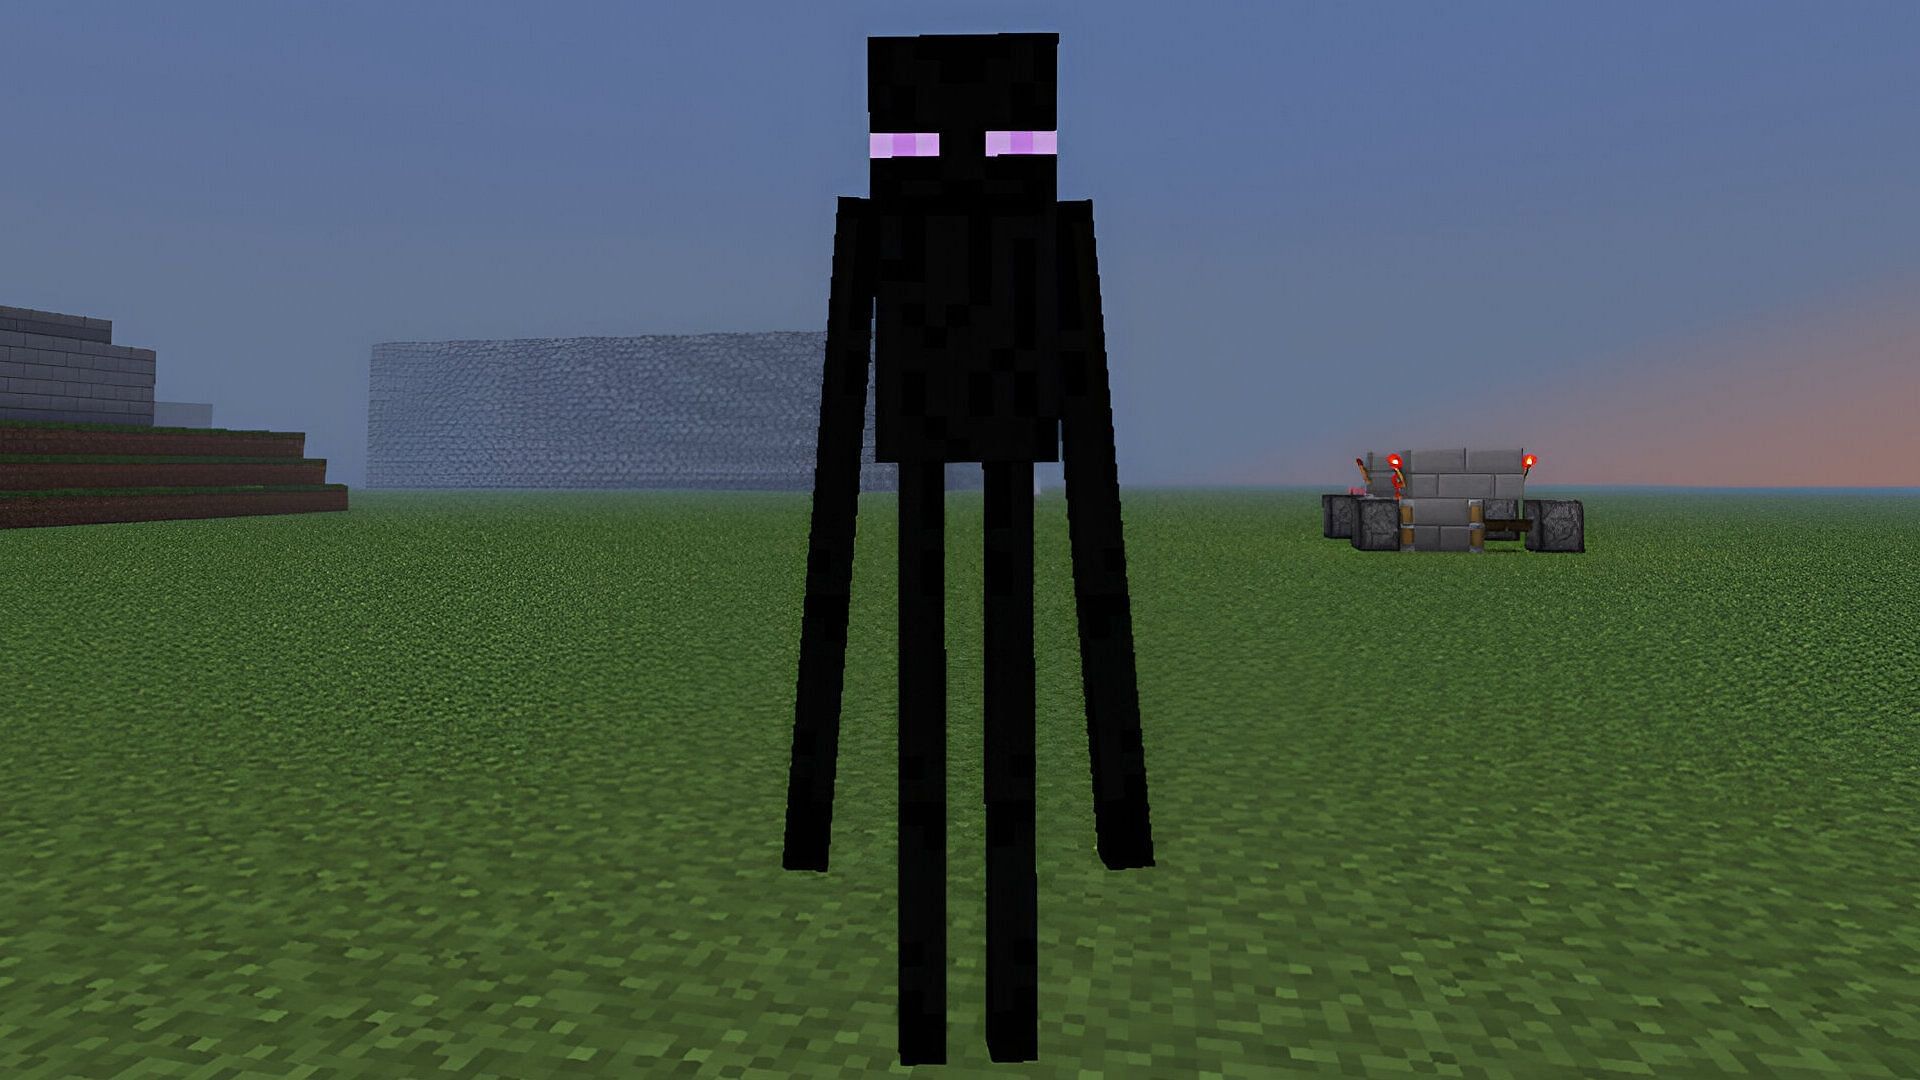 Endermen are theorized to have quite a dismal fate in Minecraft (Image via Mojang)